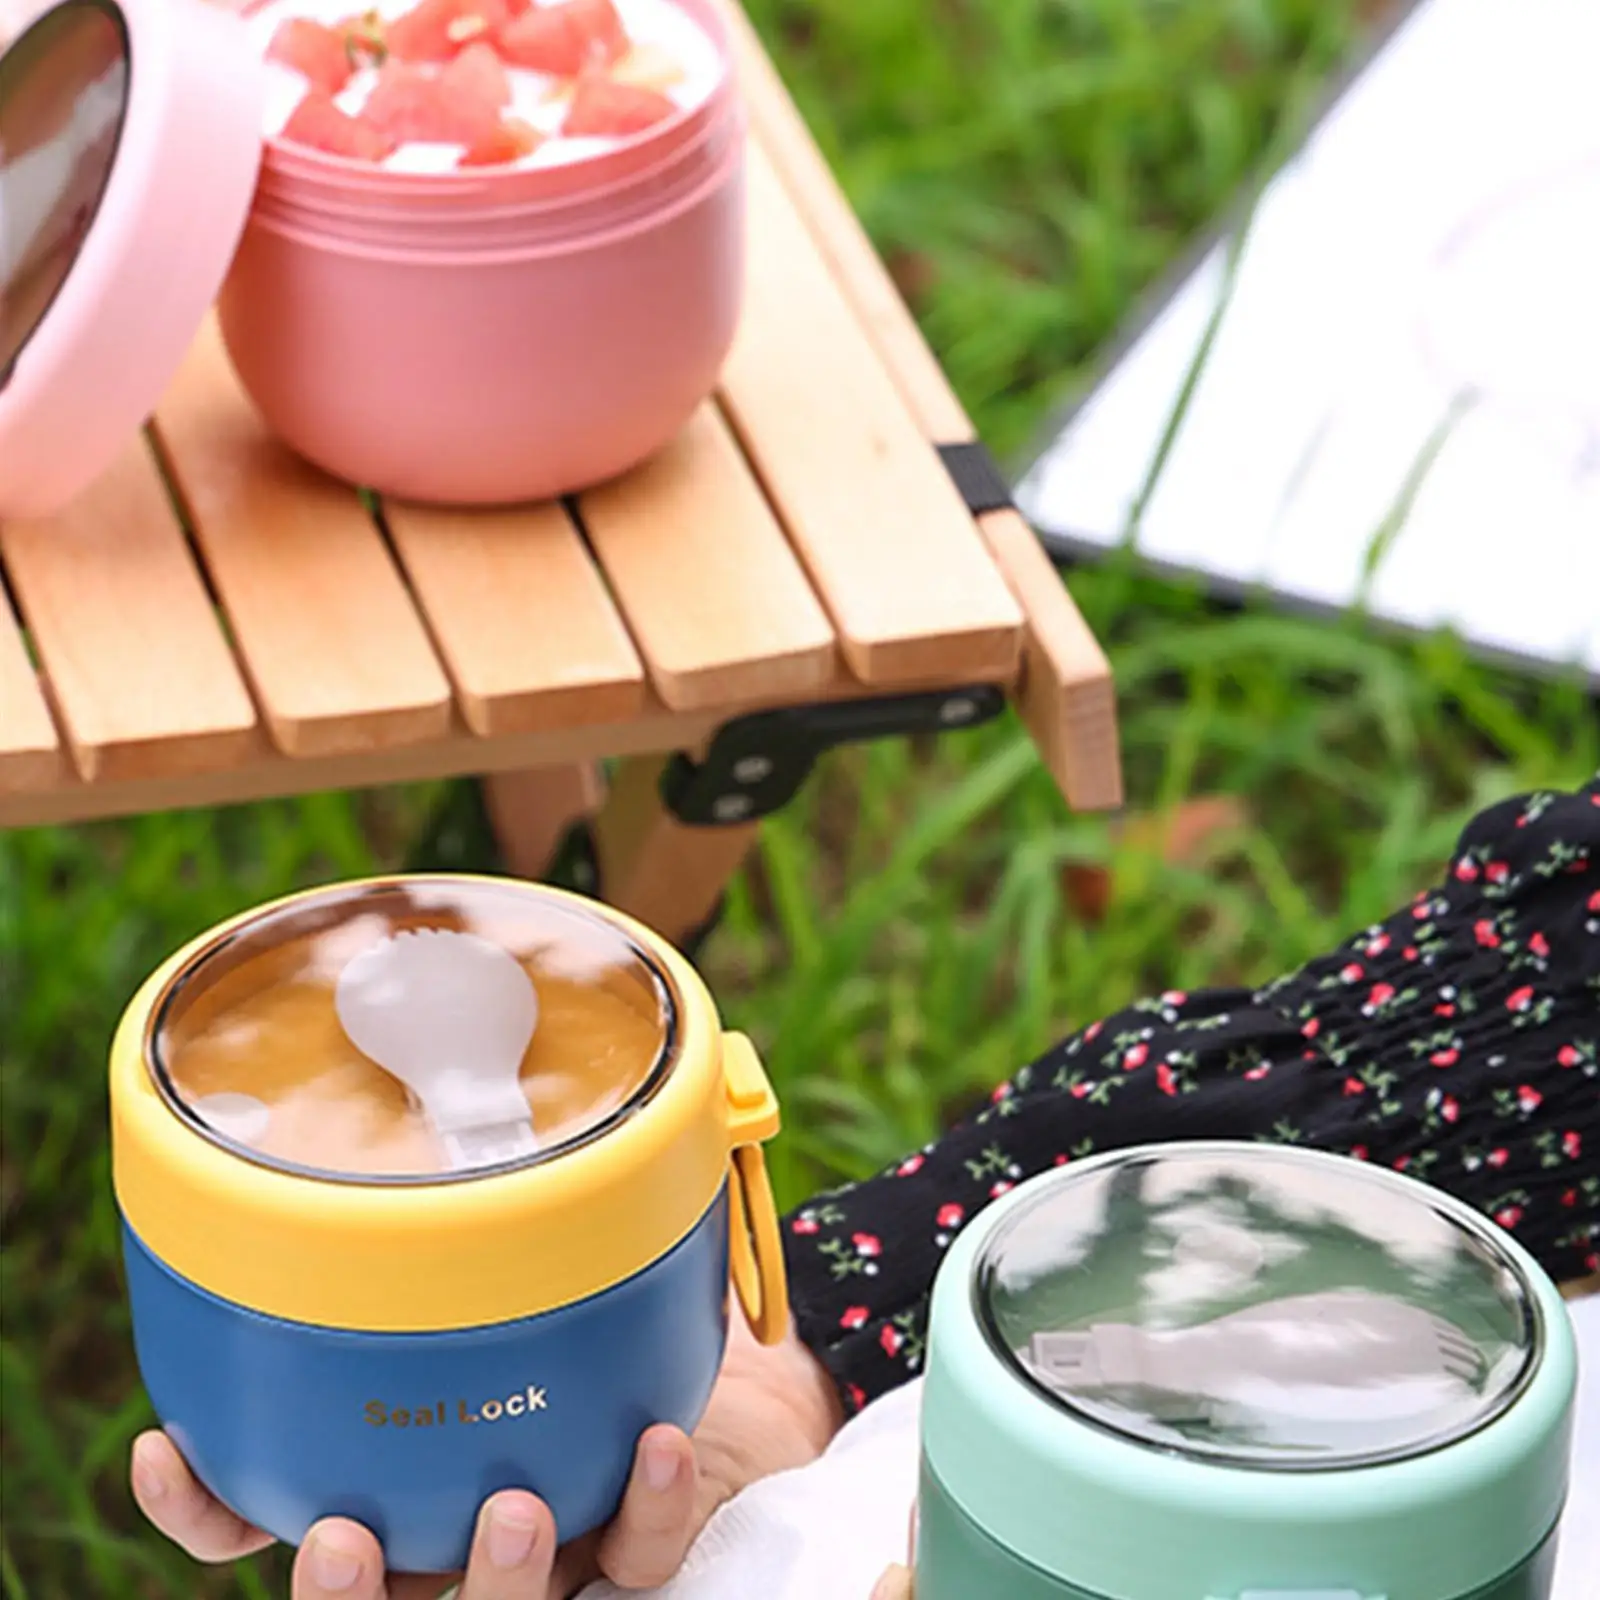 https://ae01.alicdn.com/kf/S8d436523296d40029c5c327de817b13ck/600ML-Stainless-Steel-Lunch-Box-Hot-Food-Flask-Soup-Storage-Vacuum-Thermal-Jar-Containers-Bento-Lunch.jpg